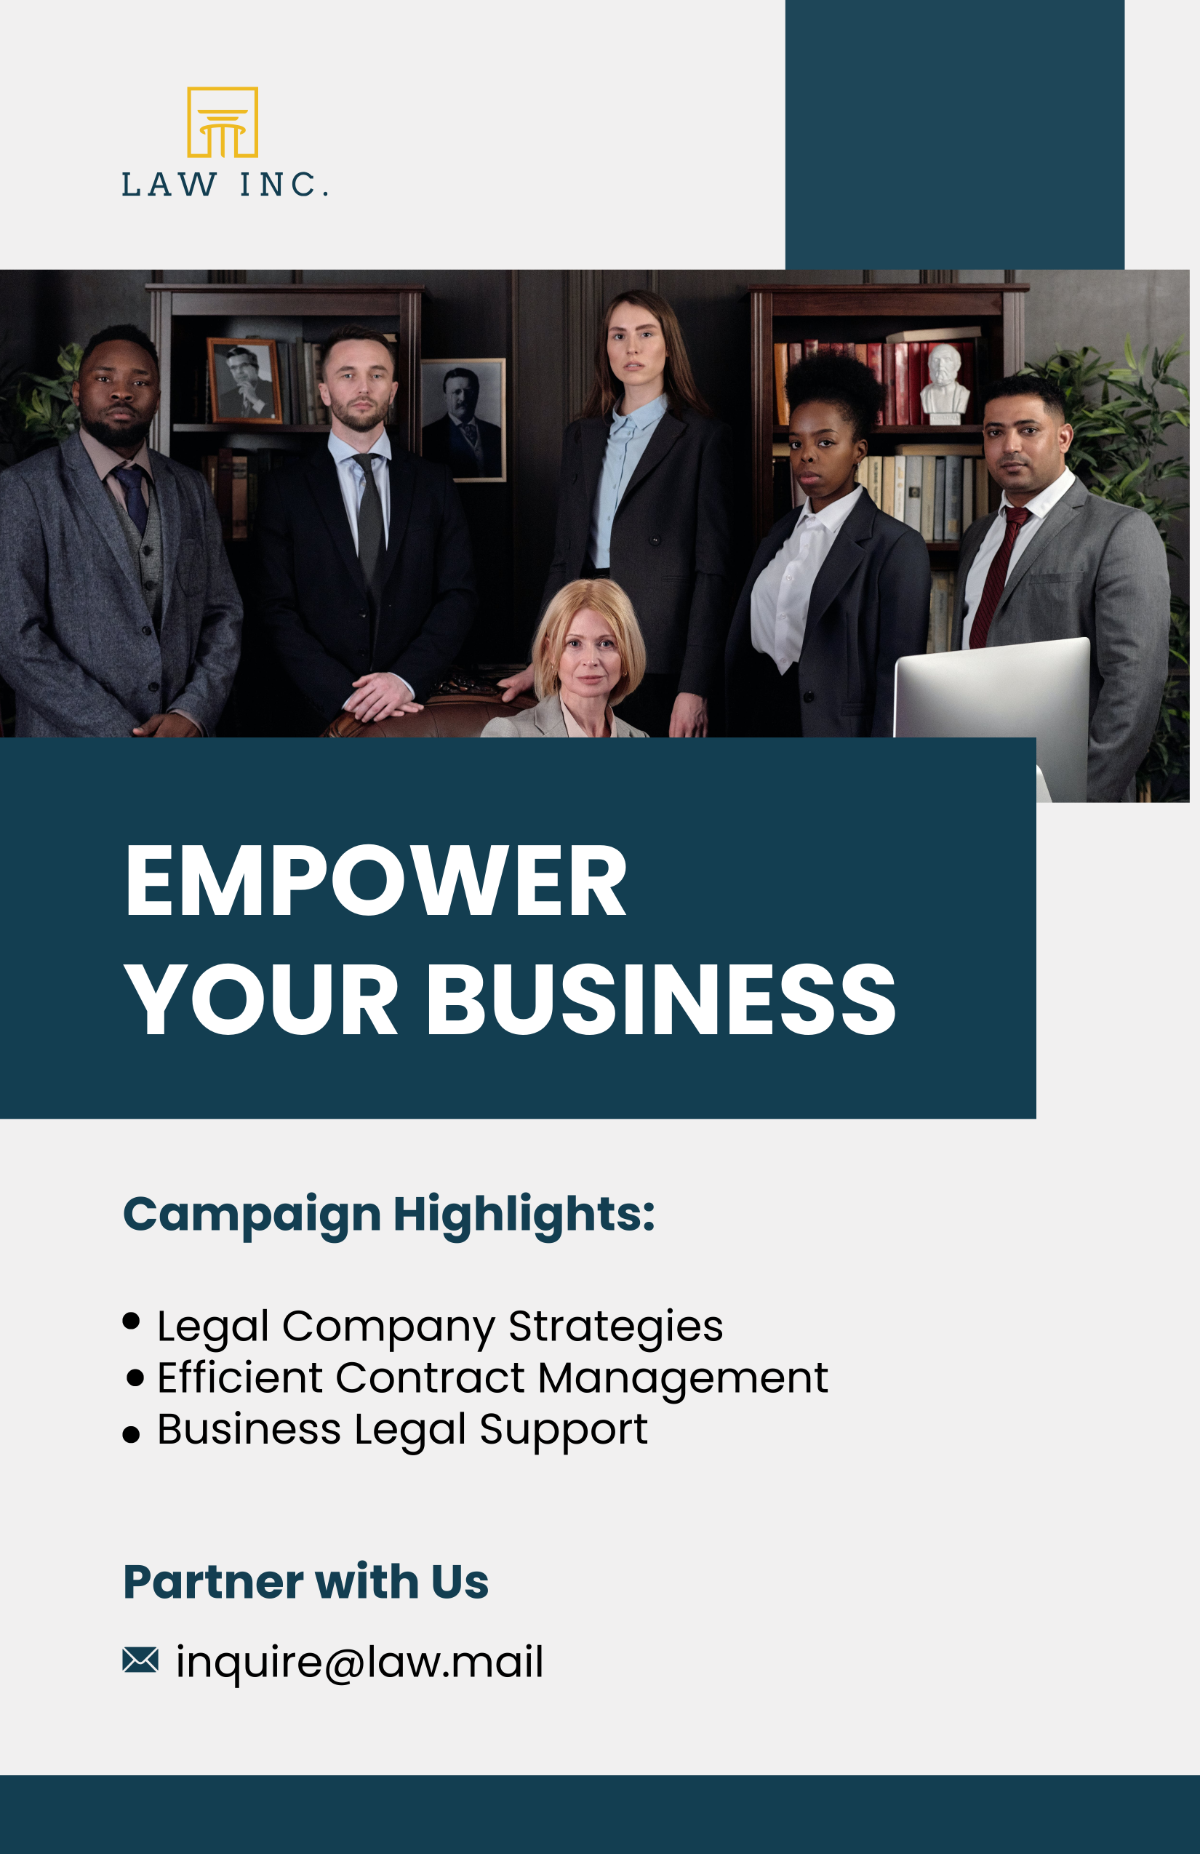 Law Firm Campaign Poster Template